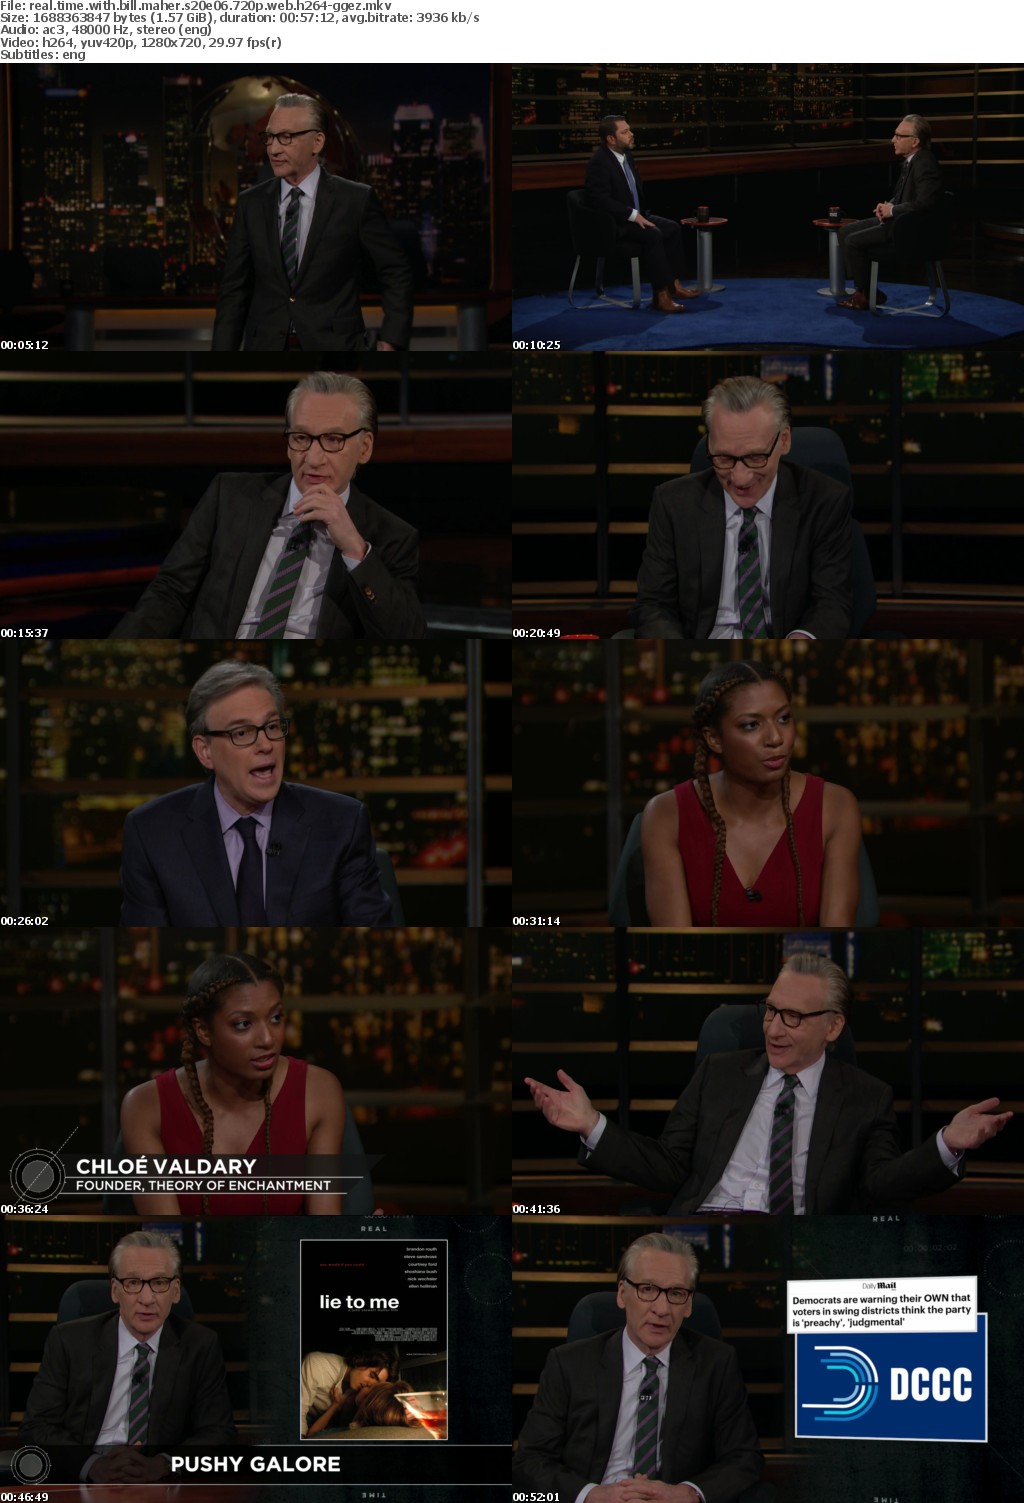 Real Time with Bill Maher S20E06 720p WEB H264-GGEZ